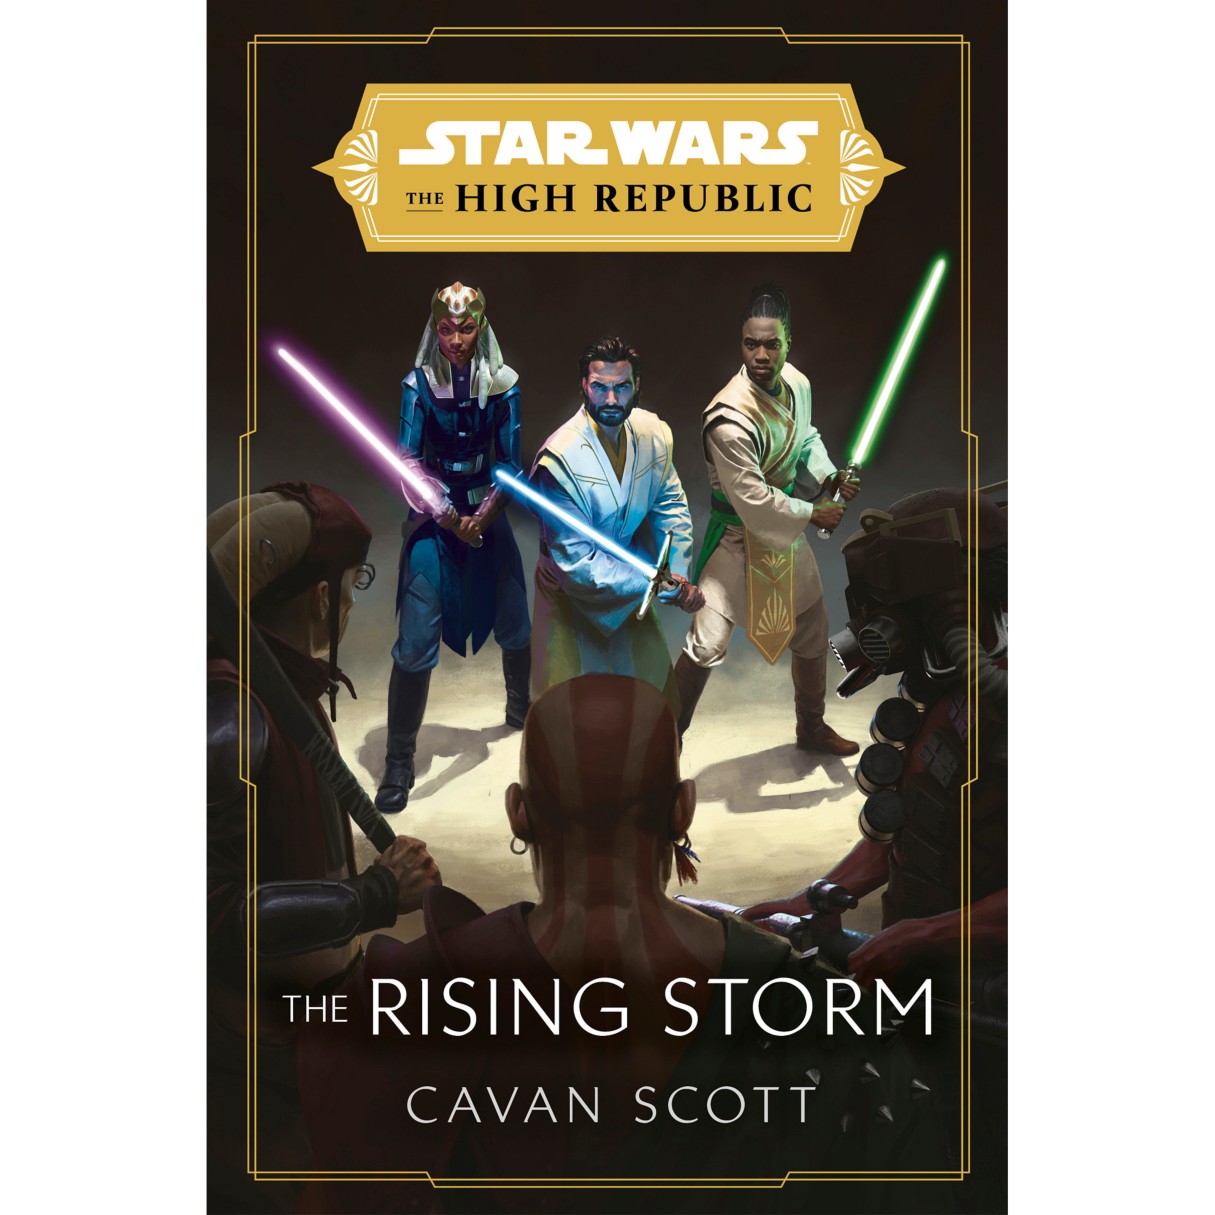 Star Wars: The High Republic: The Rising Storm Book